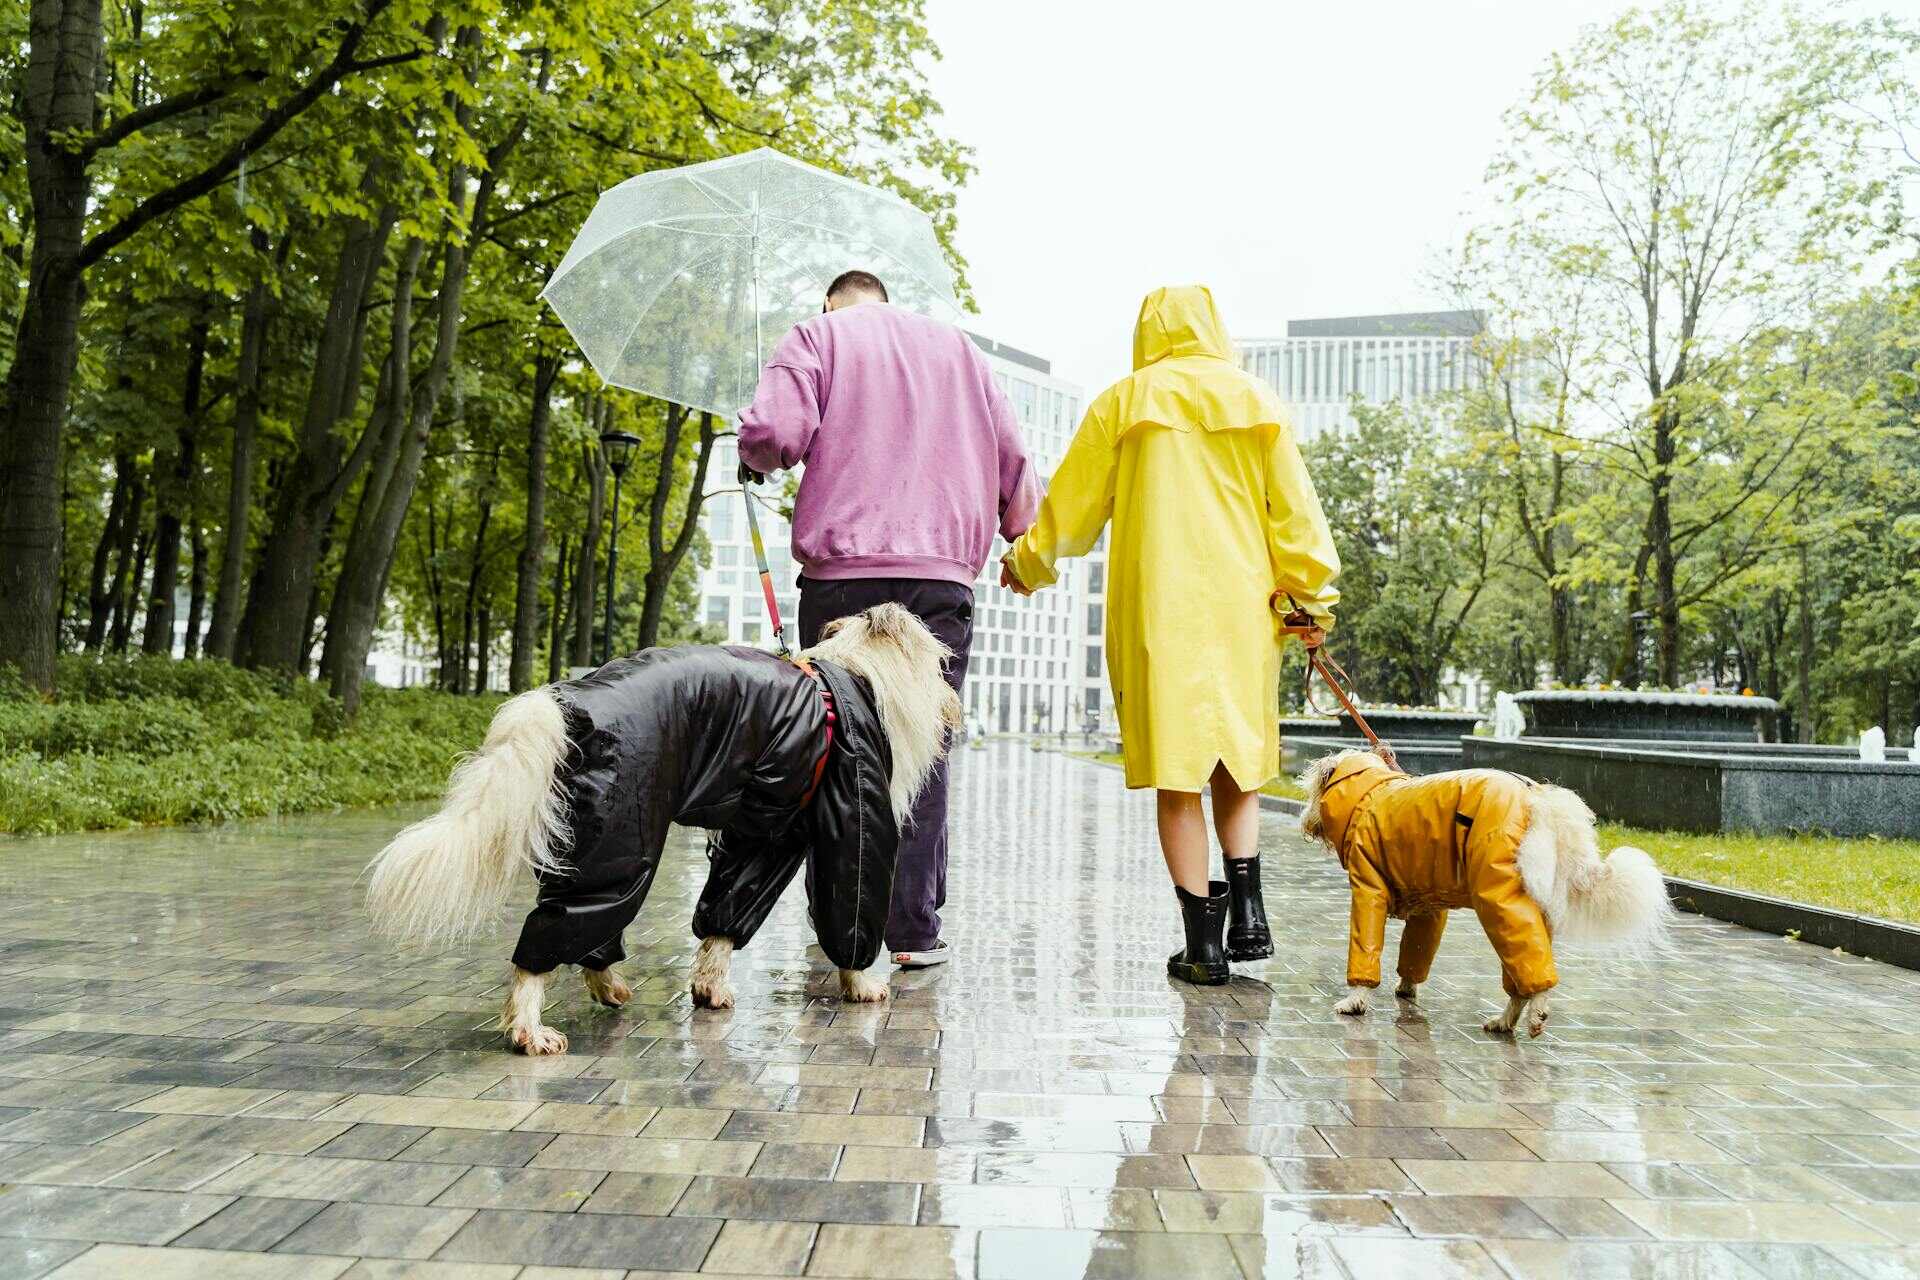 A couple wearing raincoats and carrying an umbrella walking their dogs on a rainy day